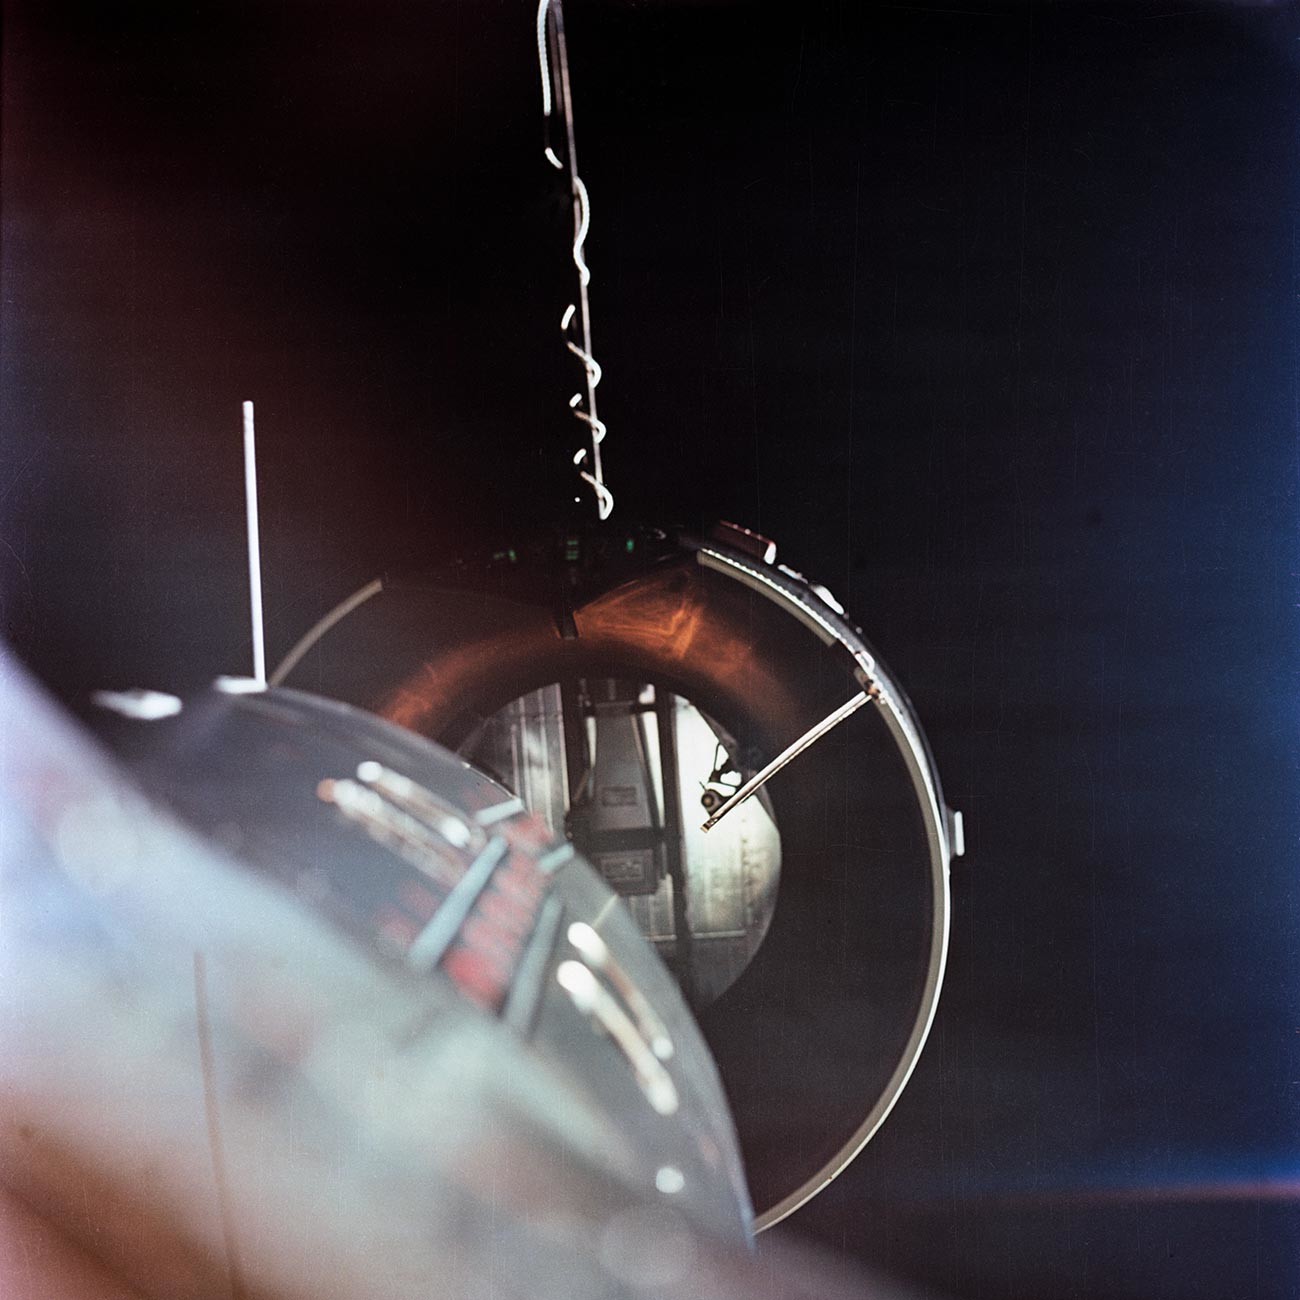 The Agena Target Docking Vehicle seen from the National Aeronautics and Space Administration's Gemini adapter of the Agena is approximately two feet from the nose of the spacecraft (lower left).